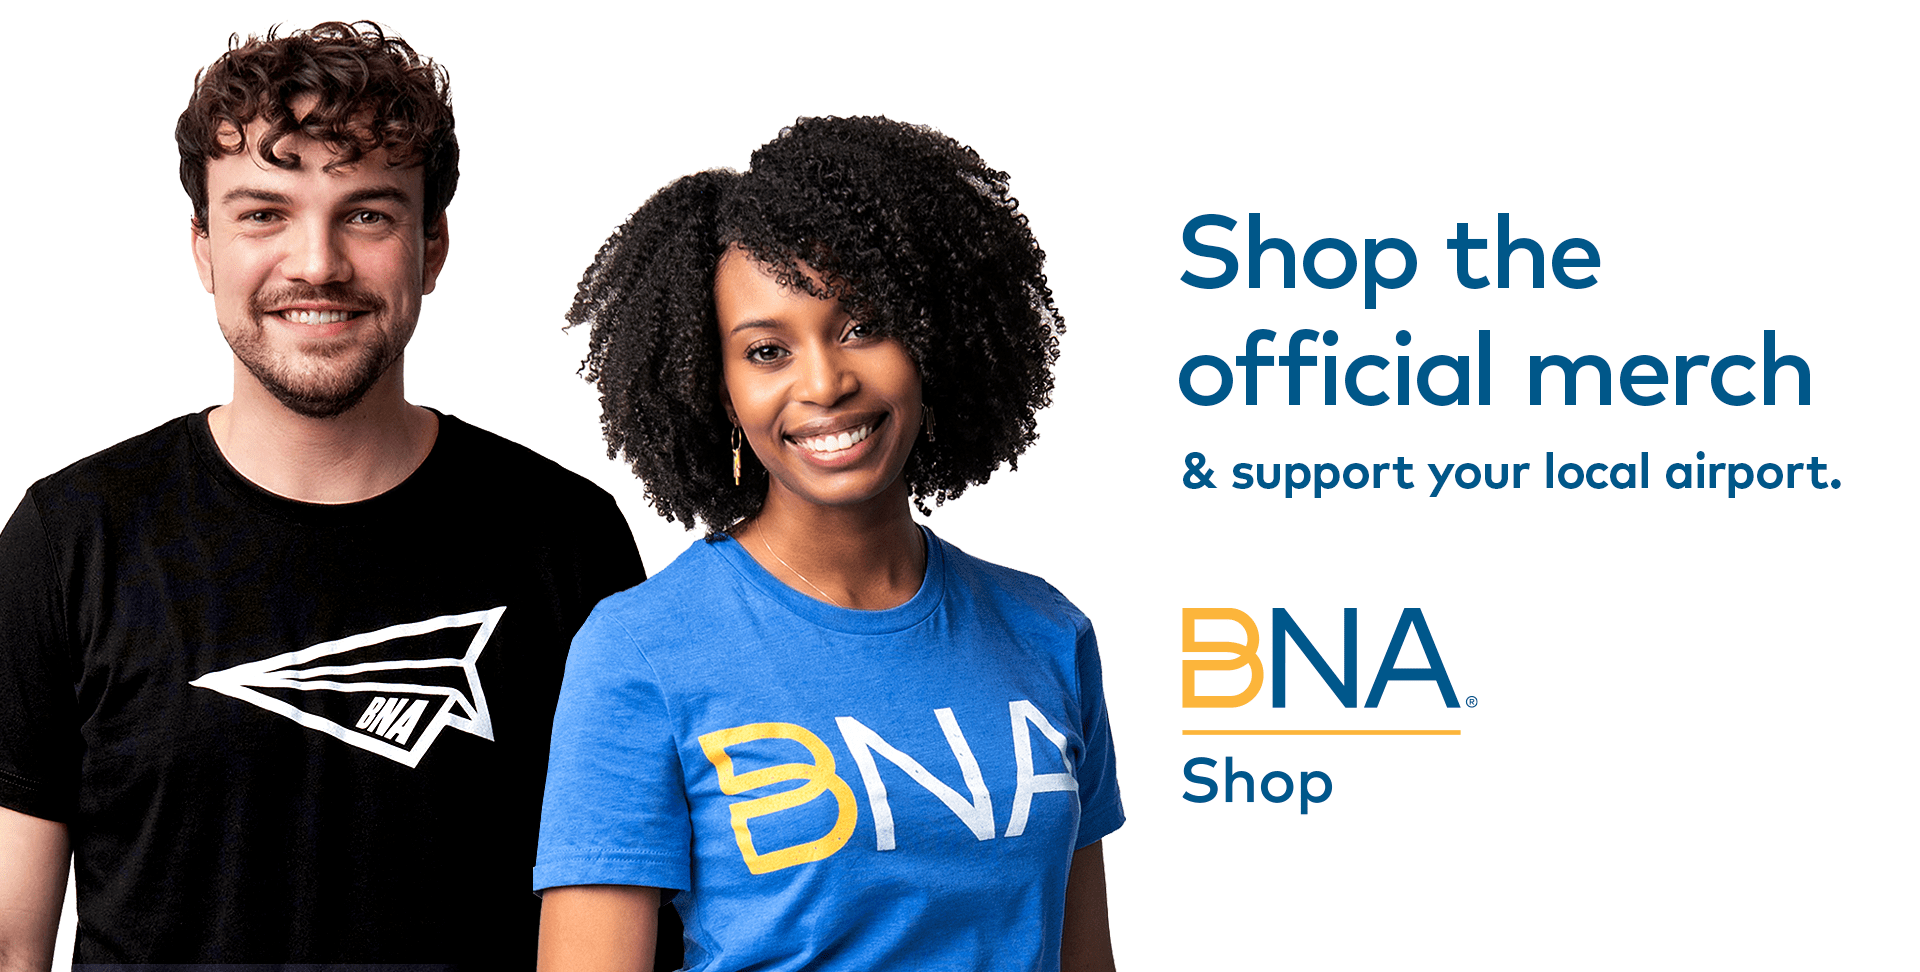 Two people wearing BNA apparel with the text "Shop the official merch and support your local airport"